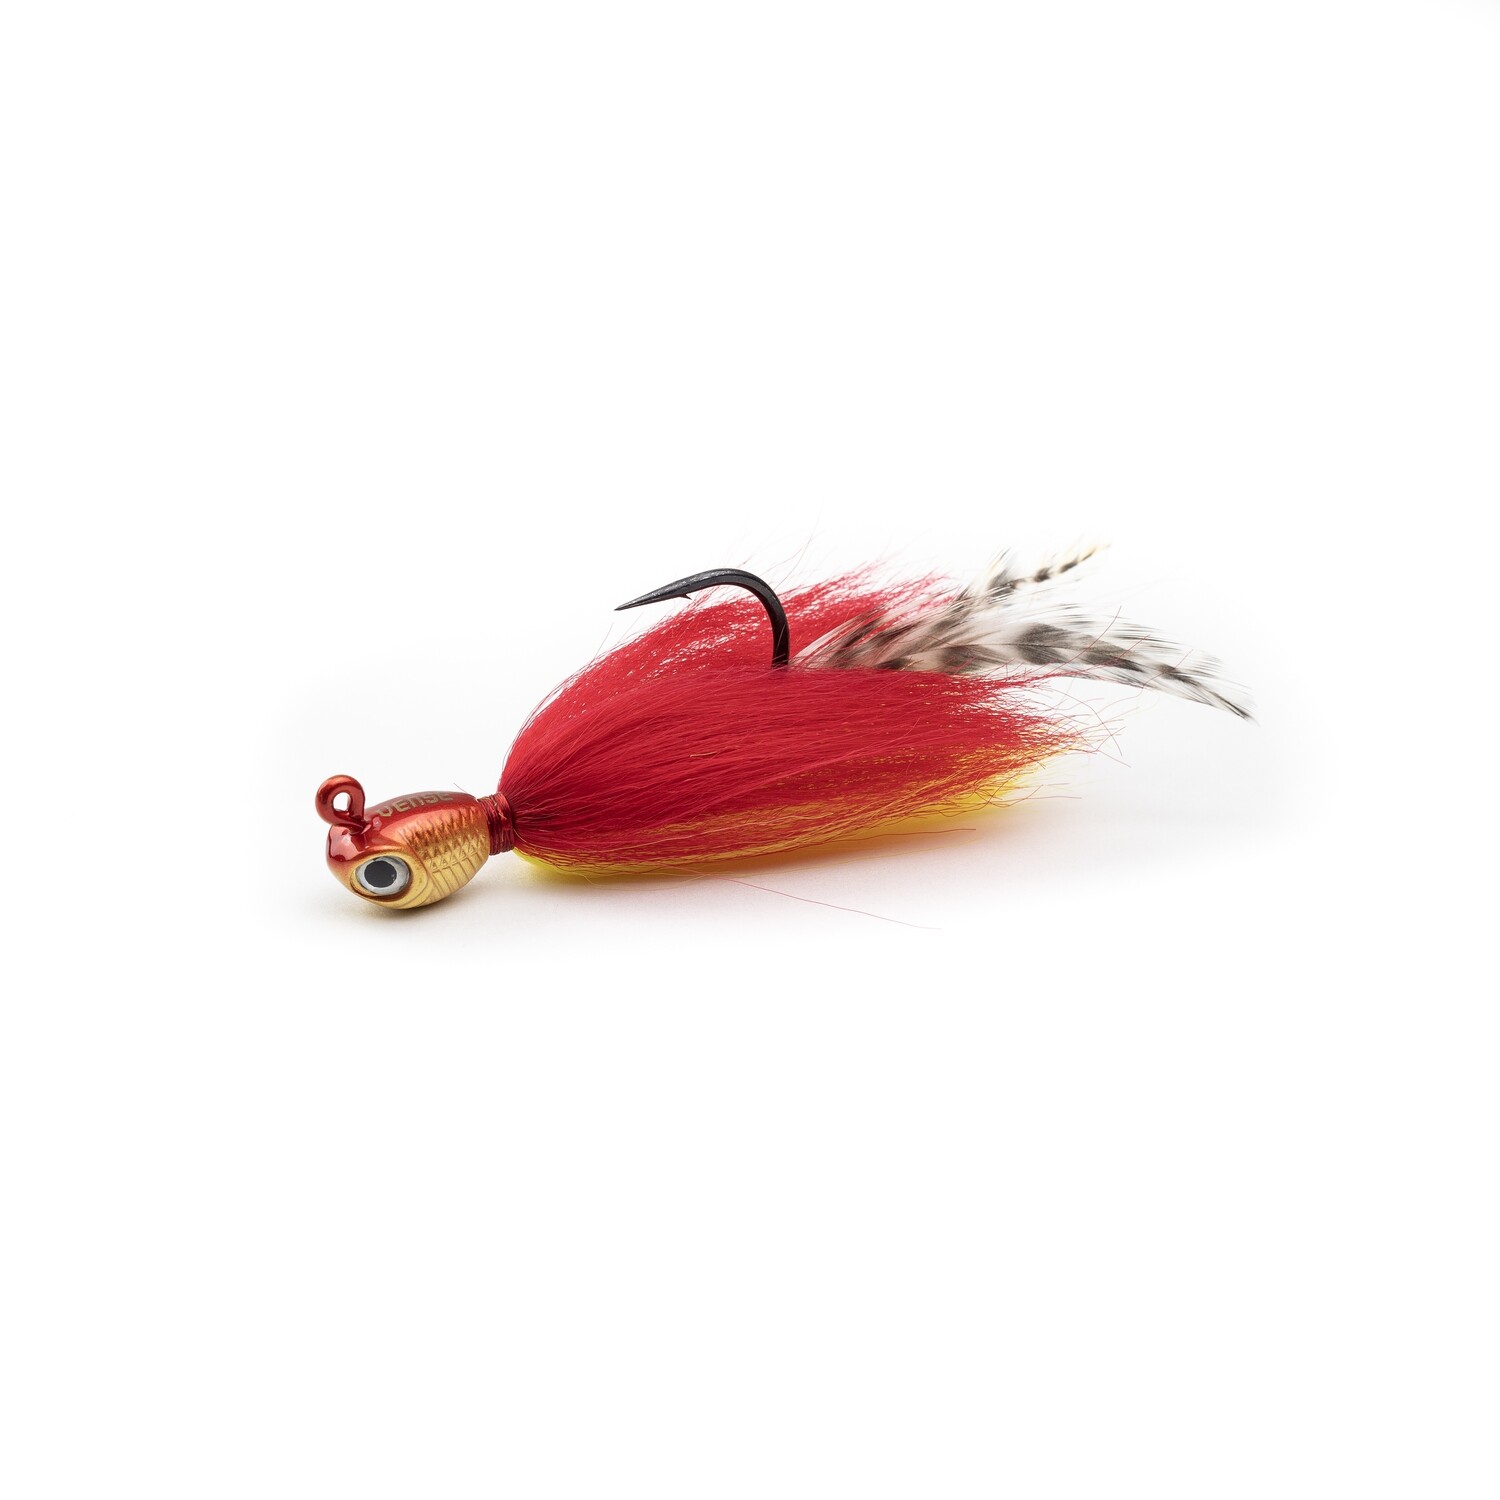 Rooster Bucktail Rattle Jig 1oz, COLOR: MELAO RED/YELLOW